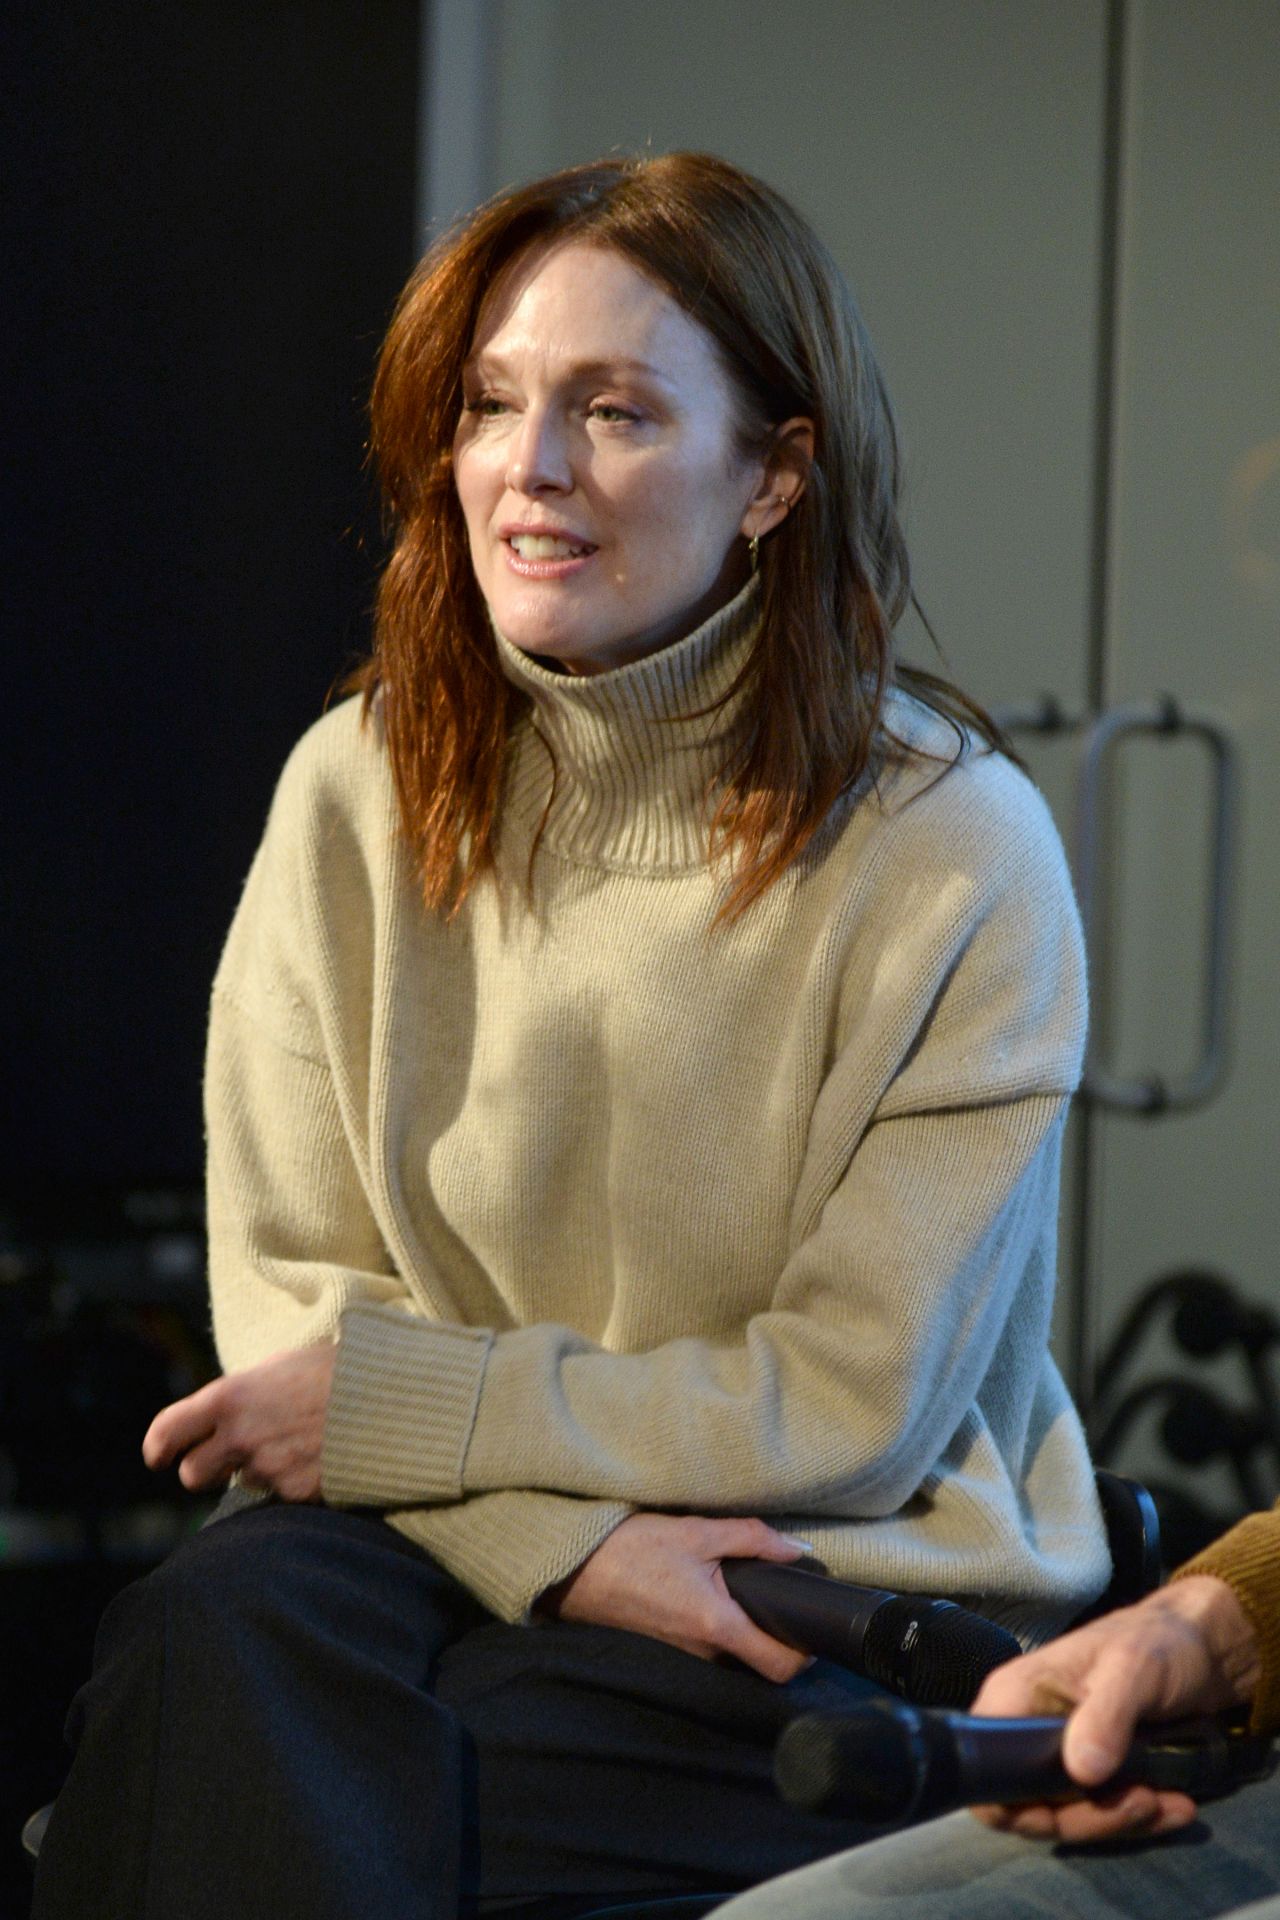 https://celebmafia.com/wp-content/uploads/2019/01/julianne-moore-9th-annual-peace-week-town-hall-in-ny-4.jpg